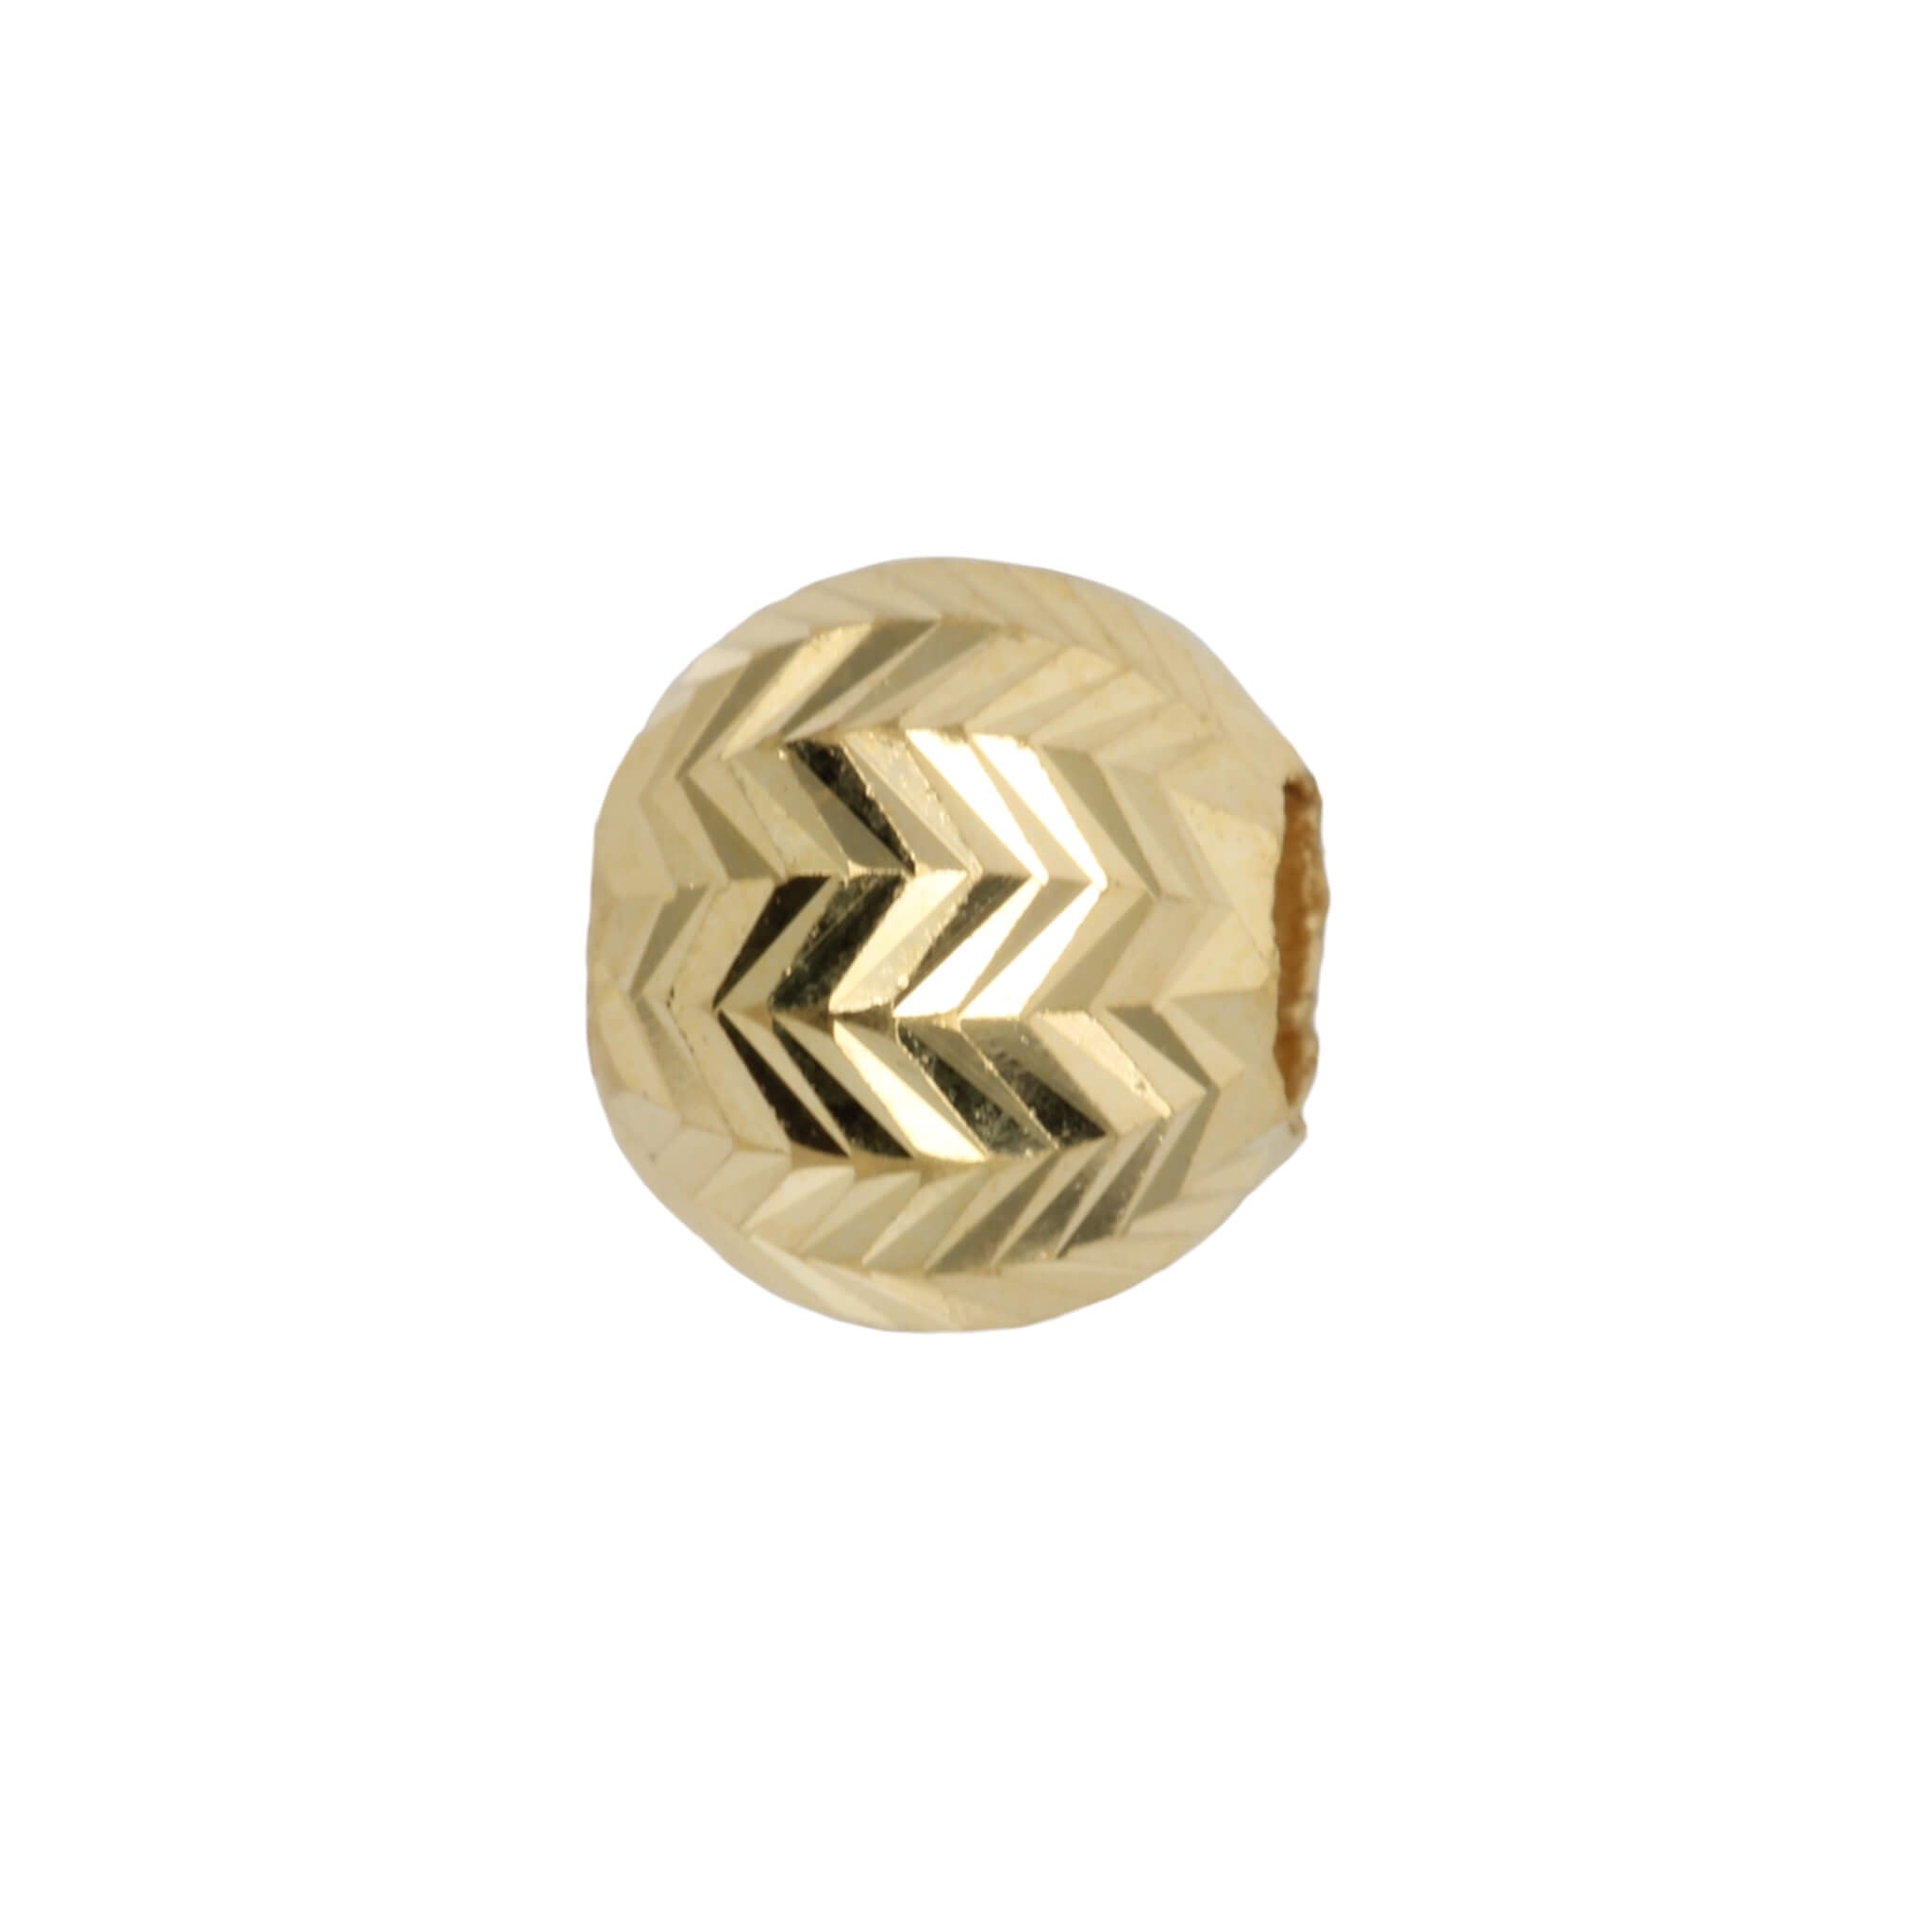 18Kt Gold 6mm Bead with Laser-Etched Patterned Surface